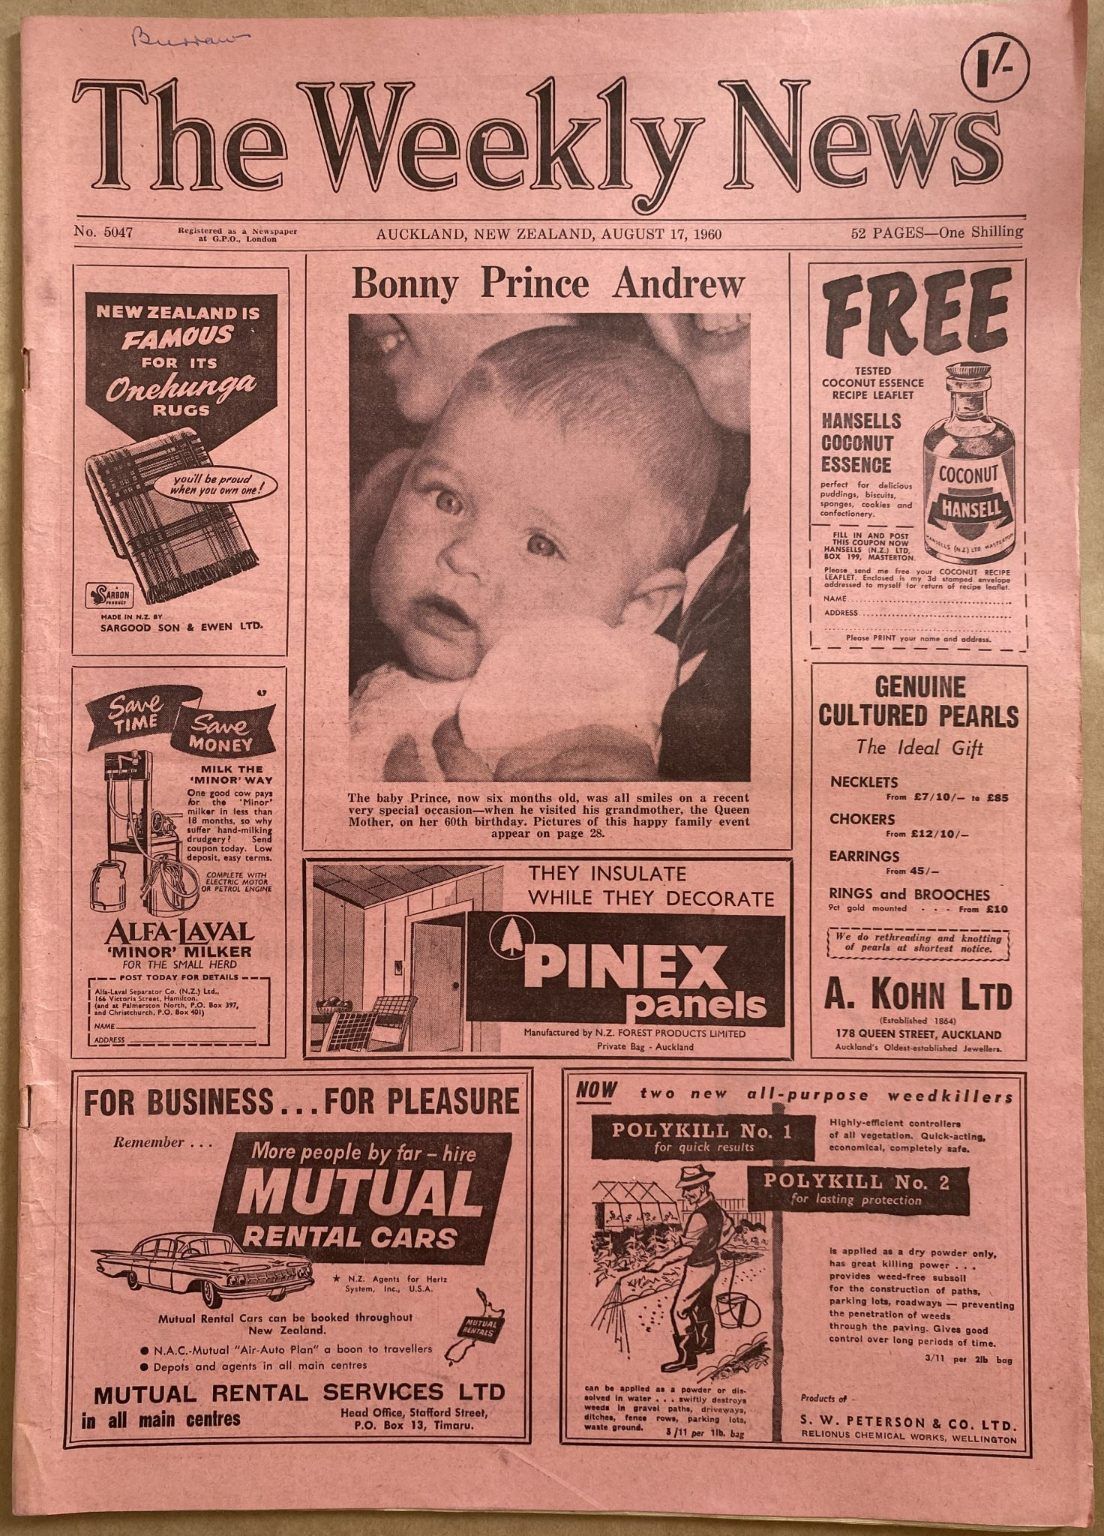 OLD NEWSPAPER: The Weekly News, No. 5047, 17 August 1960